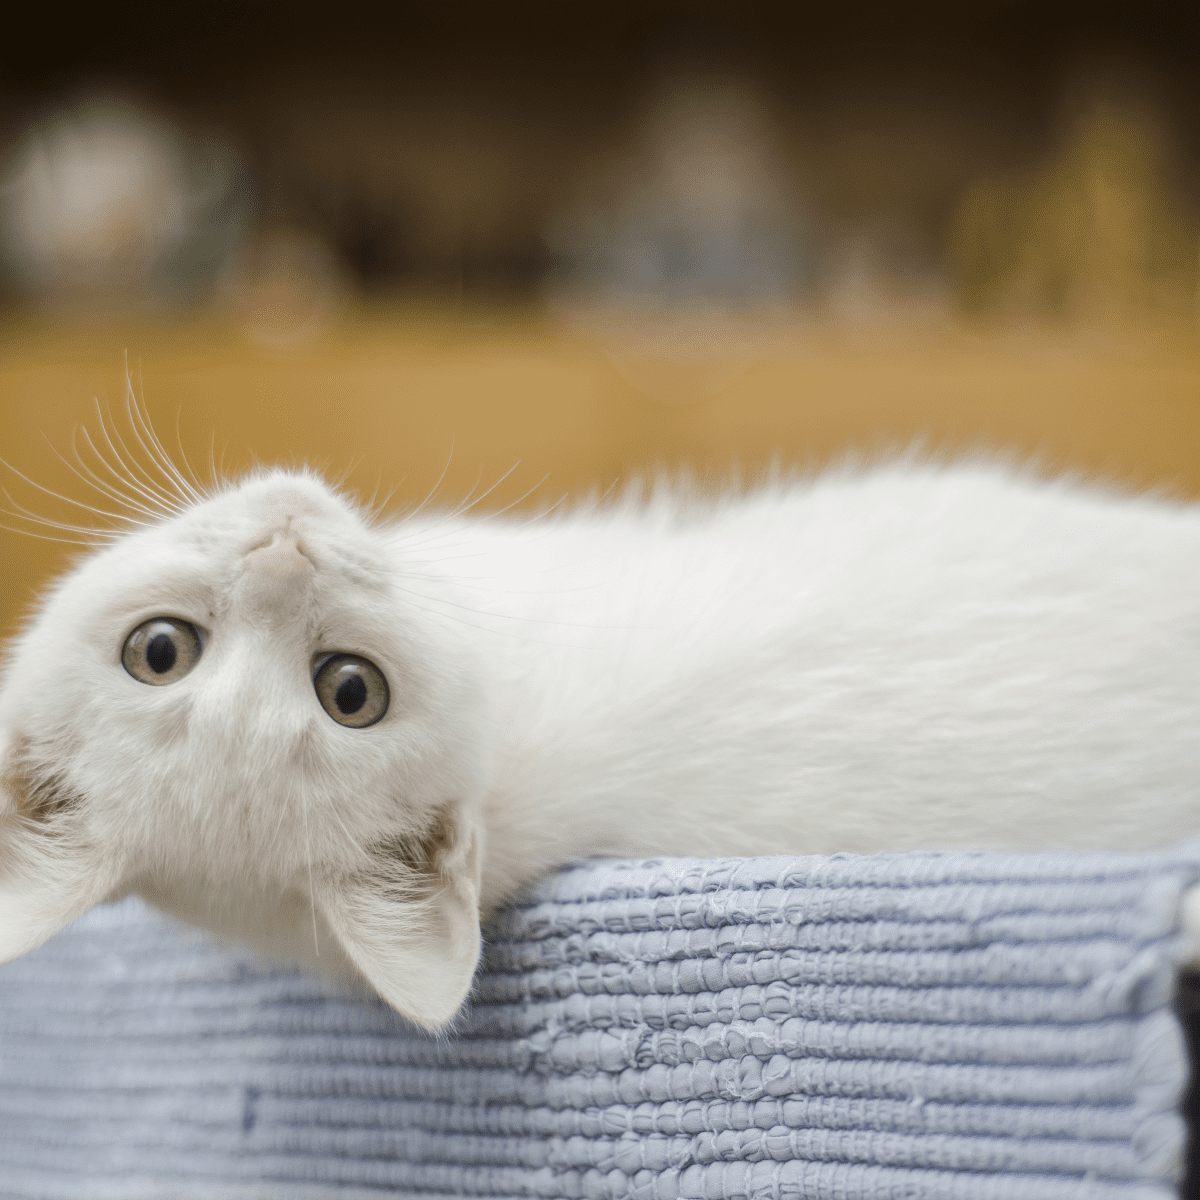 cute cats with funny quotes